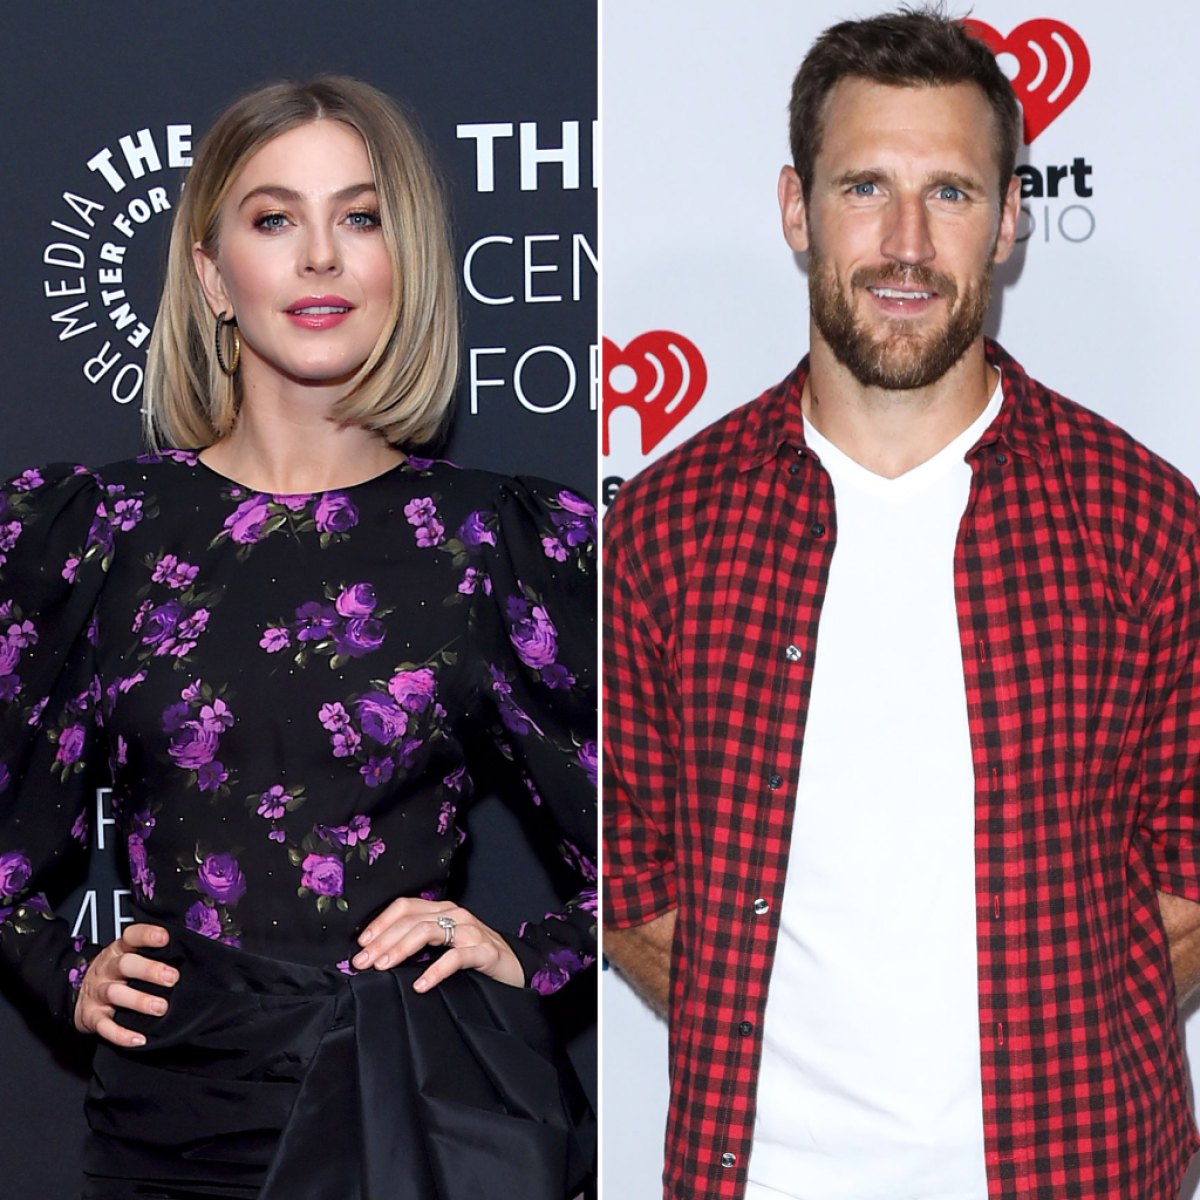 Julianne Hough's fiancé Brooks Laich puts her over his head while